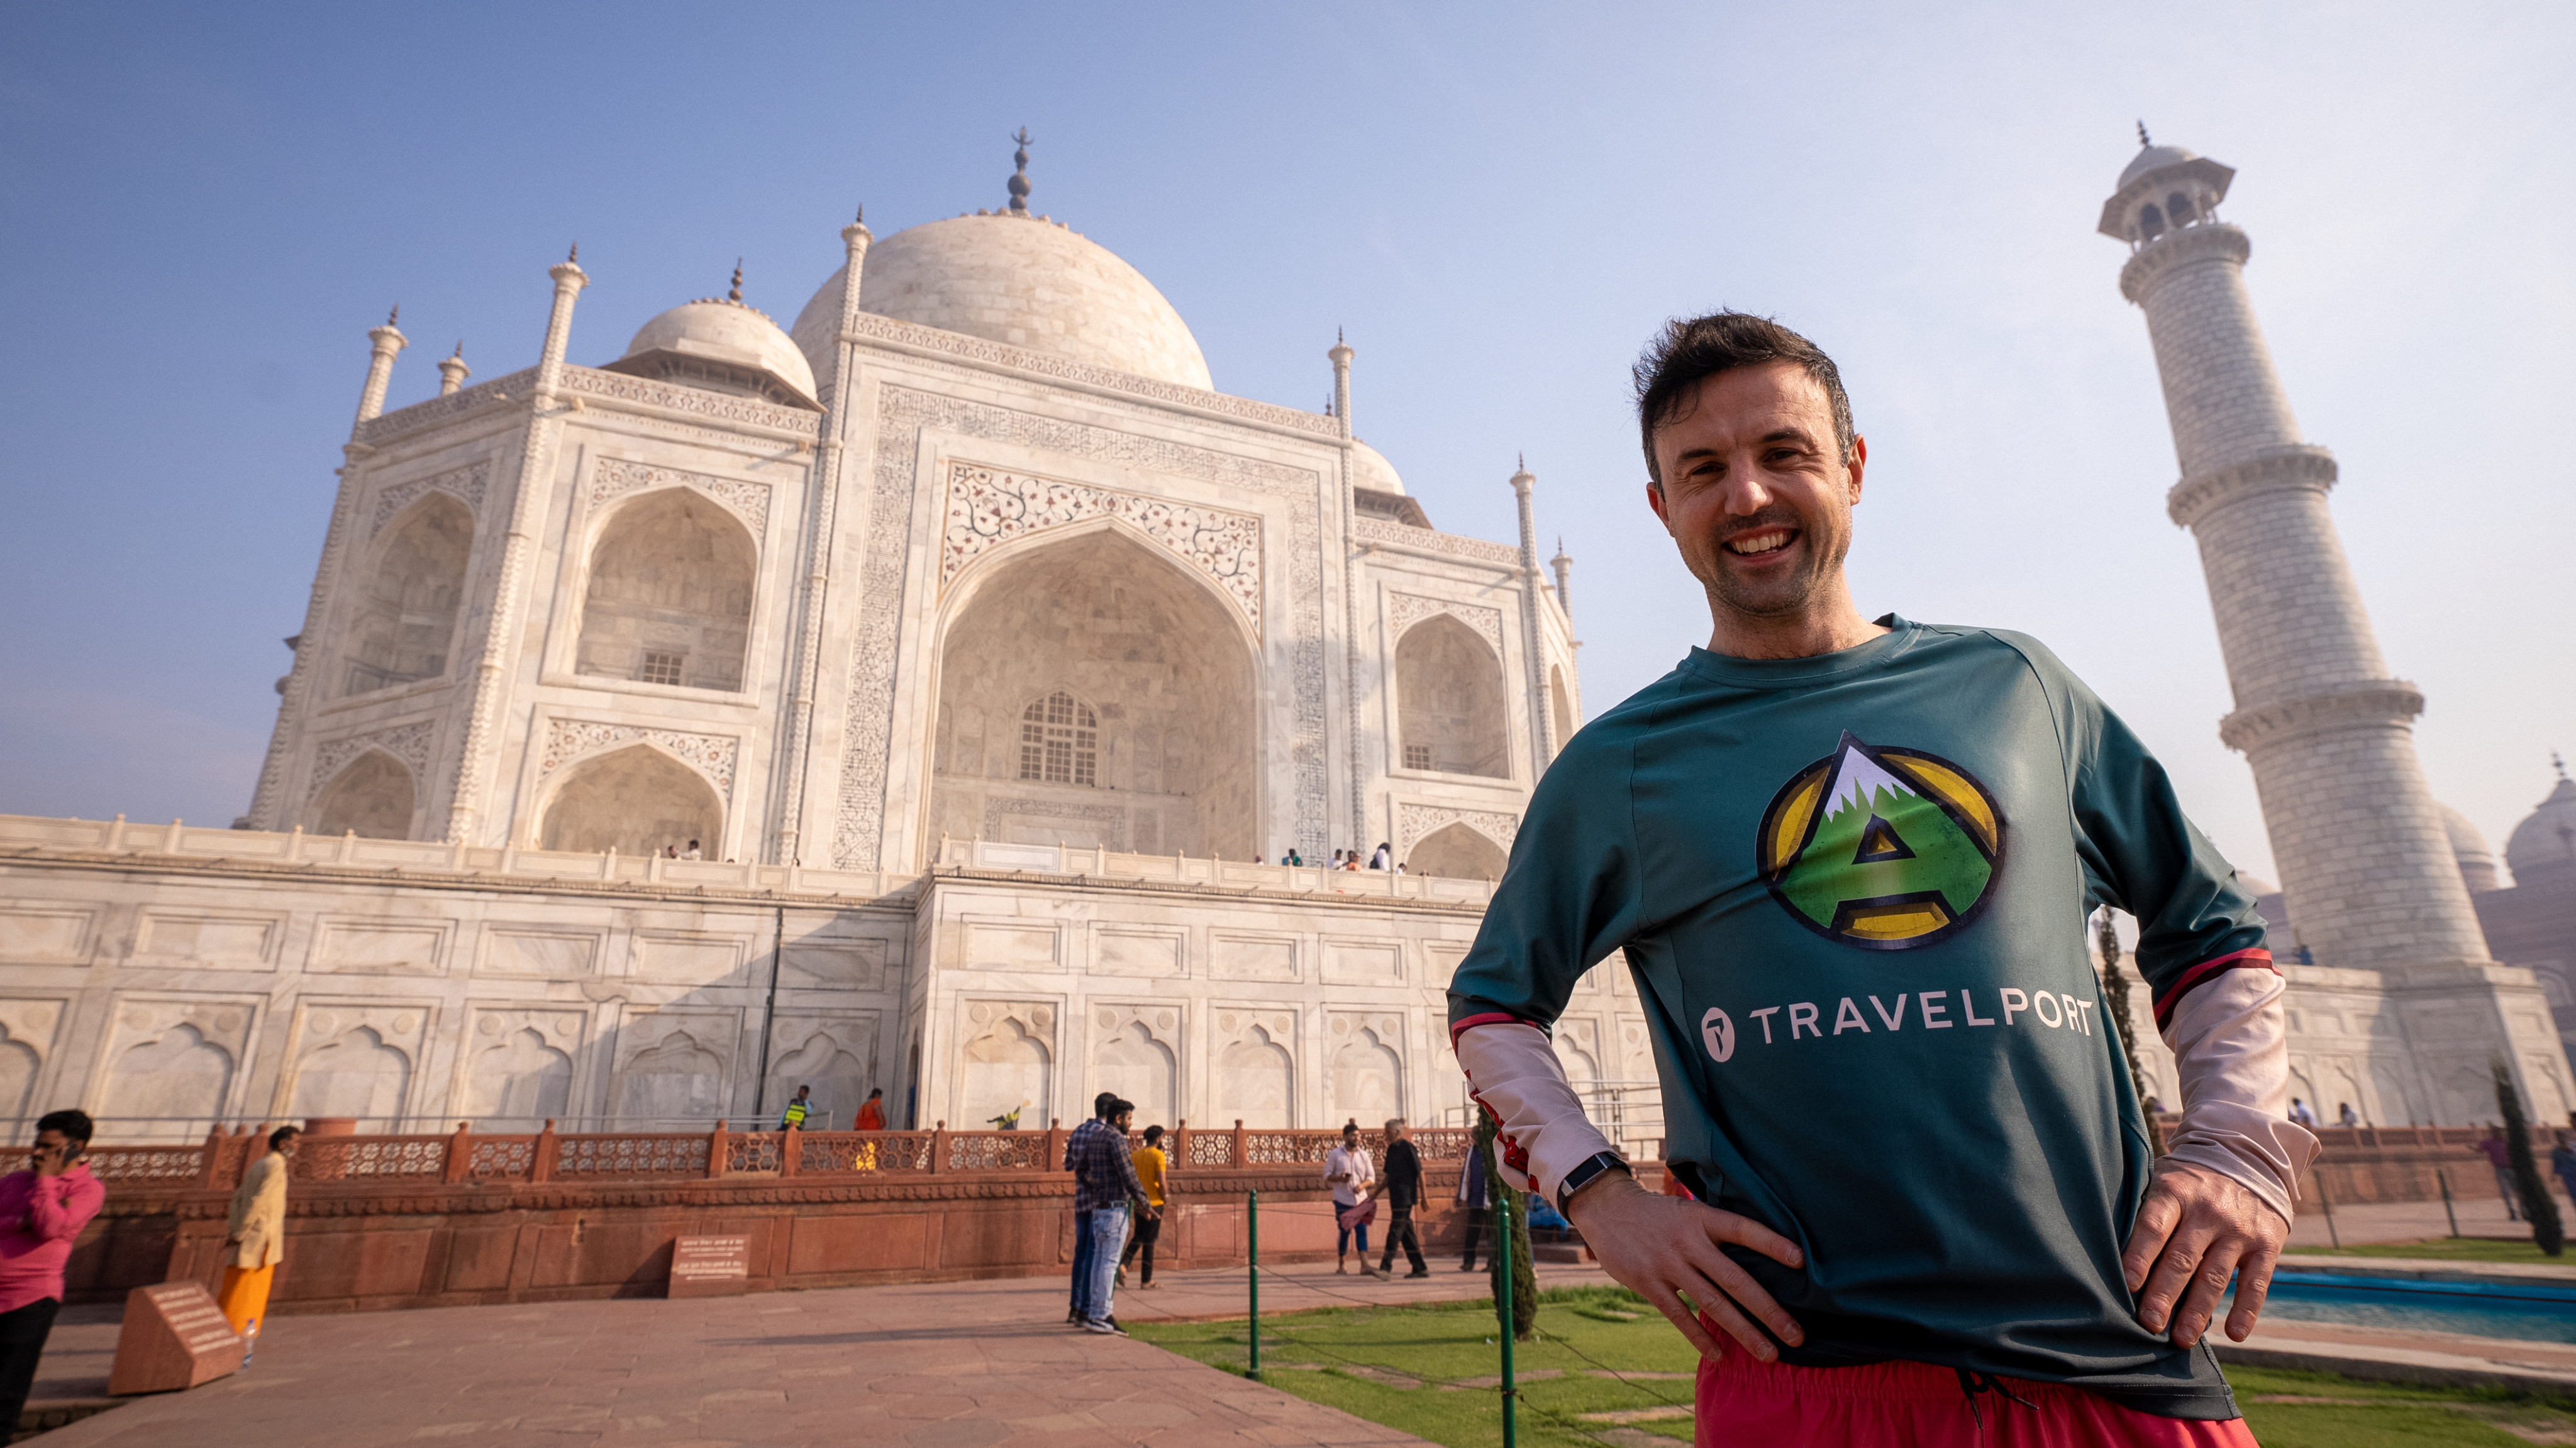 Jamie McDonald set a Guinness World Record for visiting the new Seven Wonders of the World in seven days. Above: McDonald at the Taj Mahal in Agra, India. Photo: Travelport